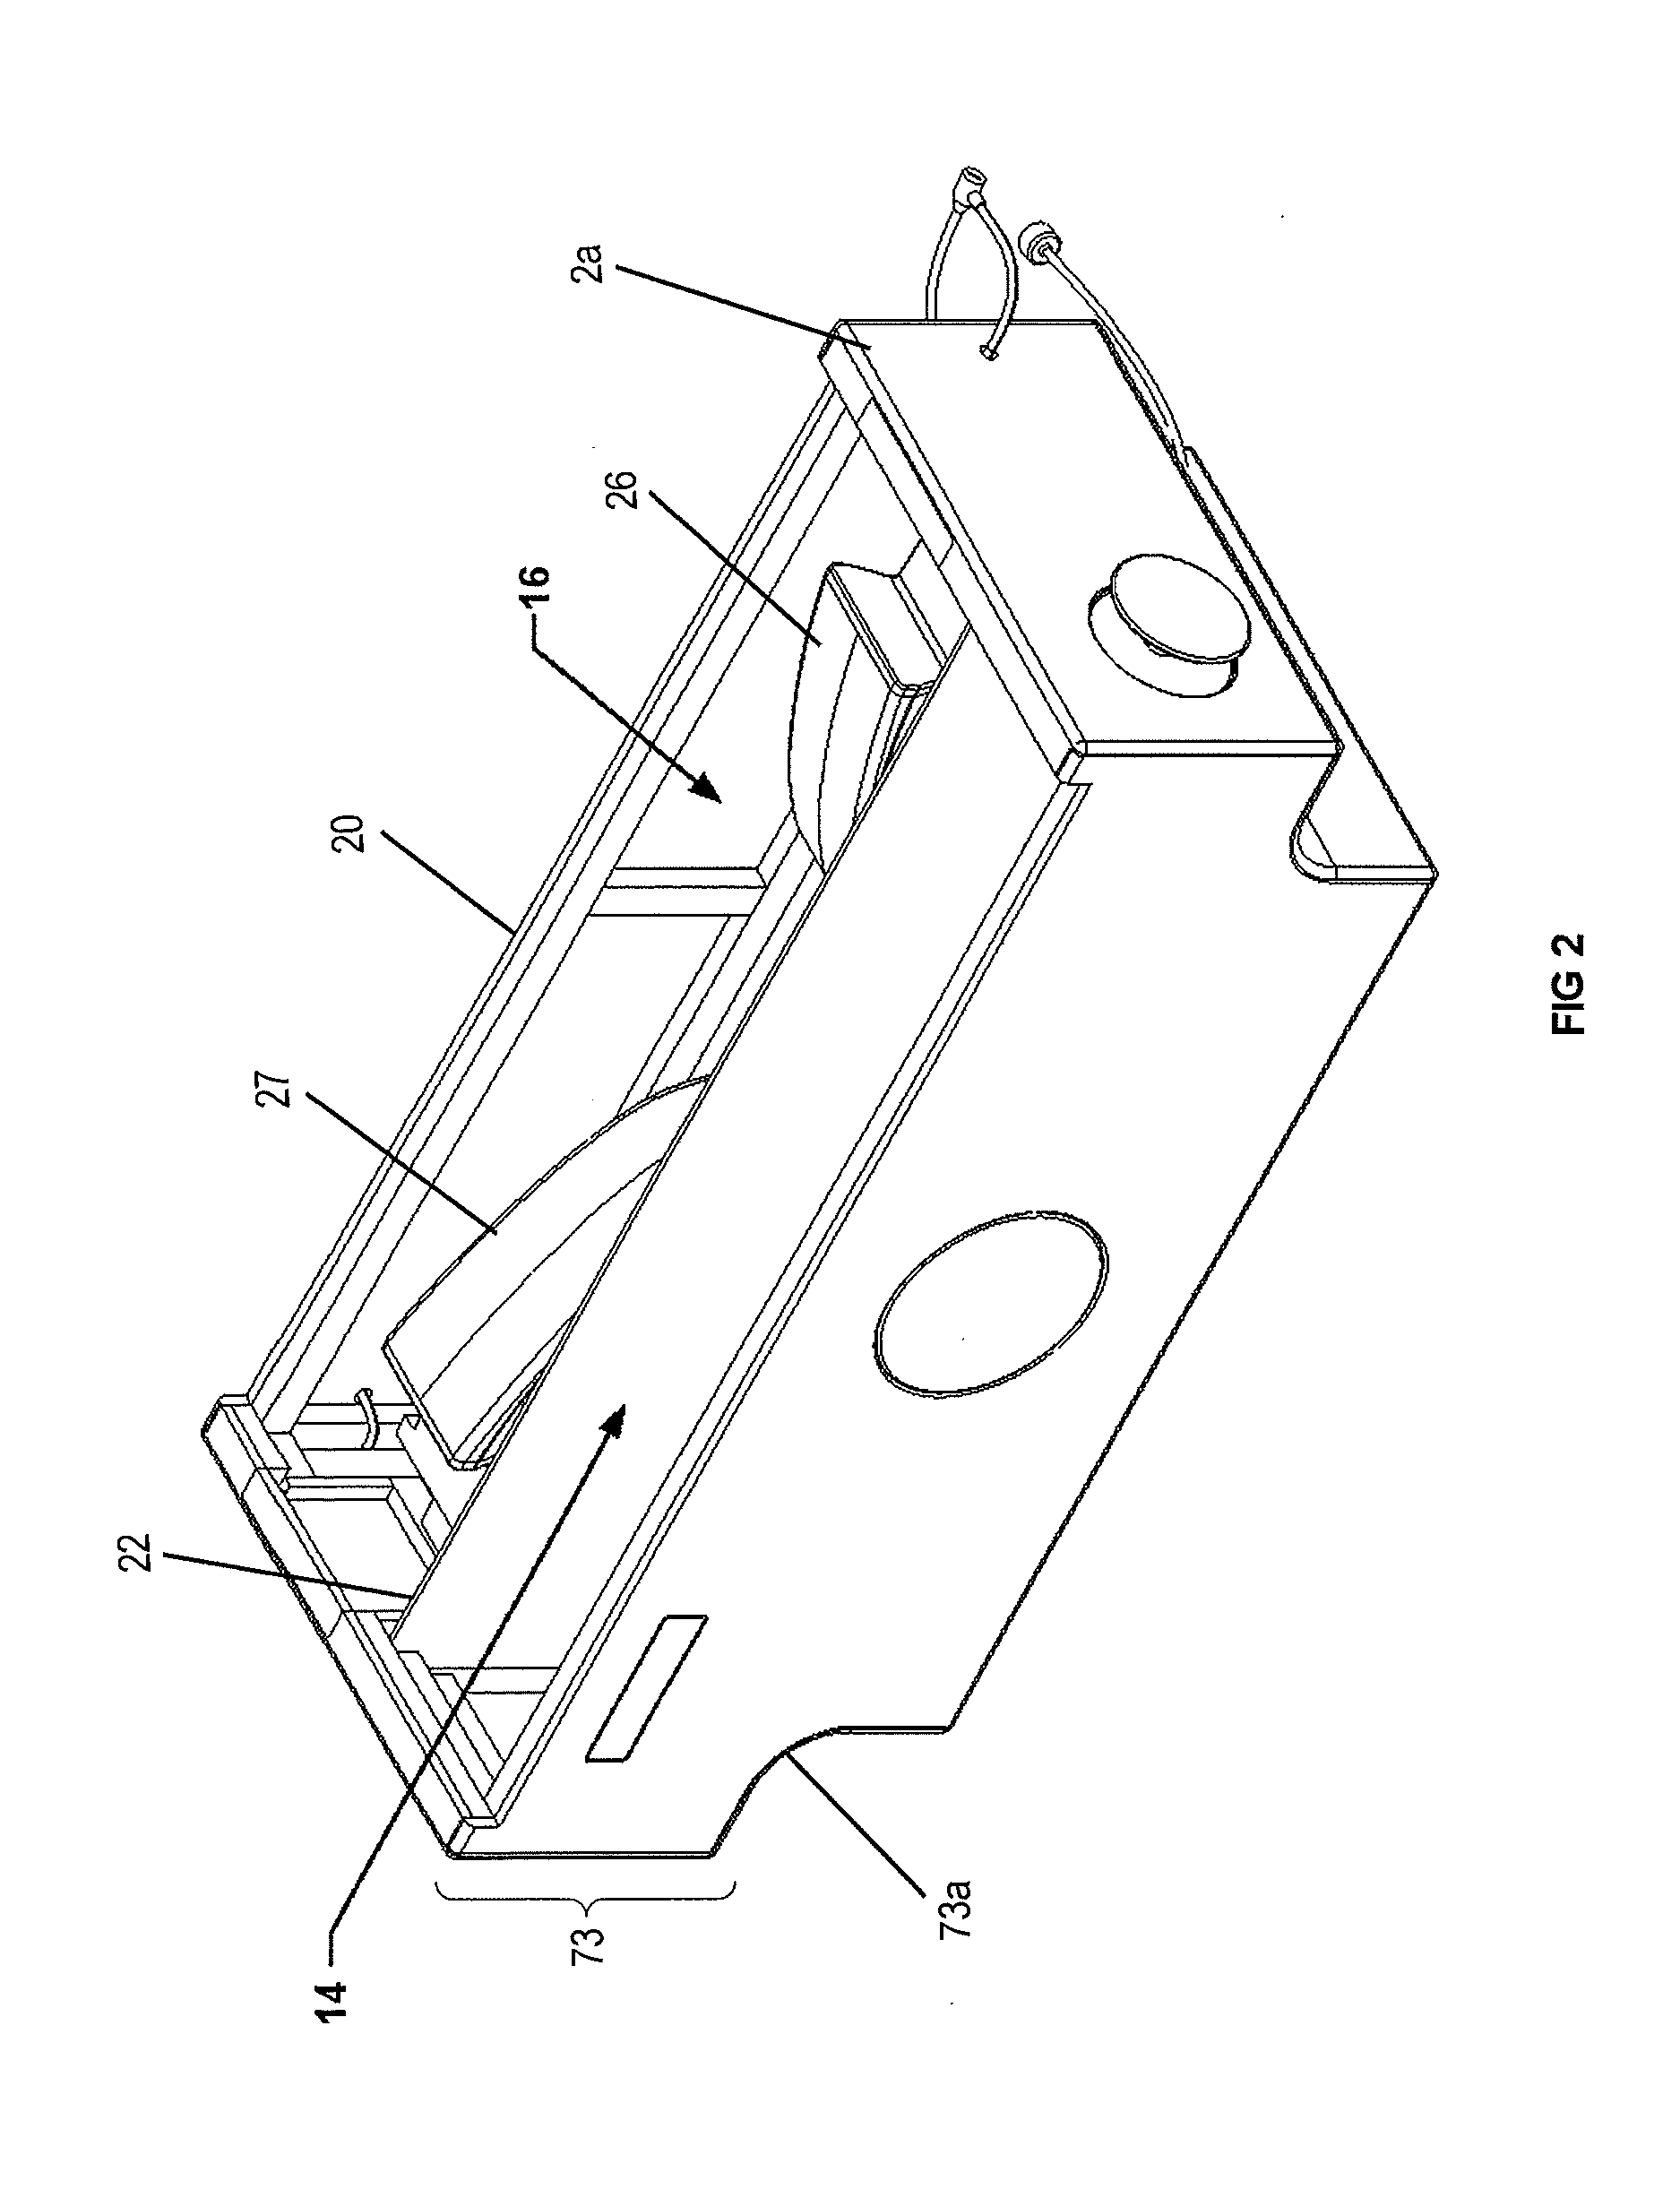 System, enclosure and method for deployment of audio visual equipment from a vehicle as a base